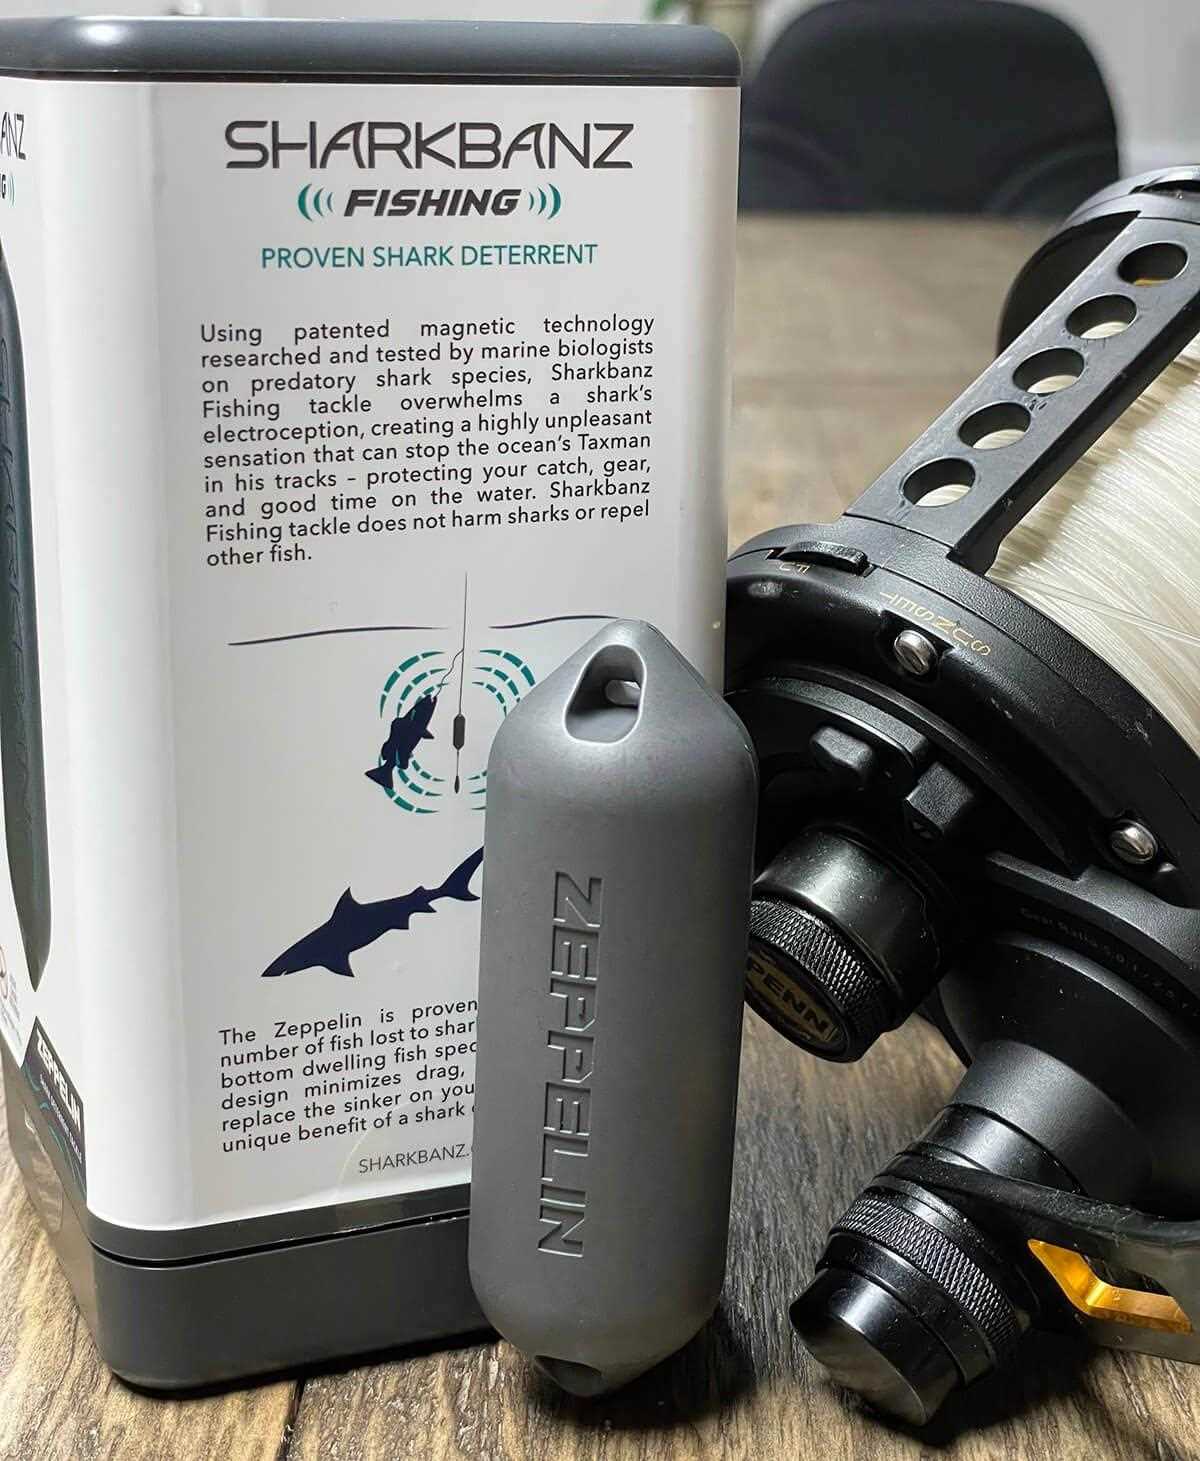 Sharks eating your catch? Sharkbanz may help prevent losing your fish